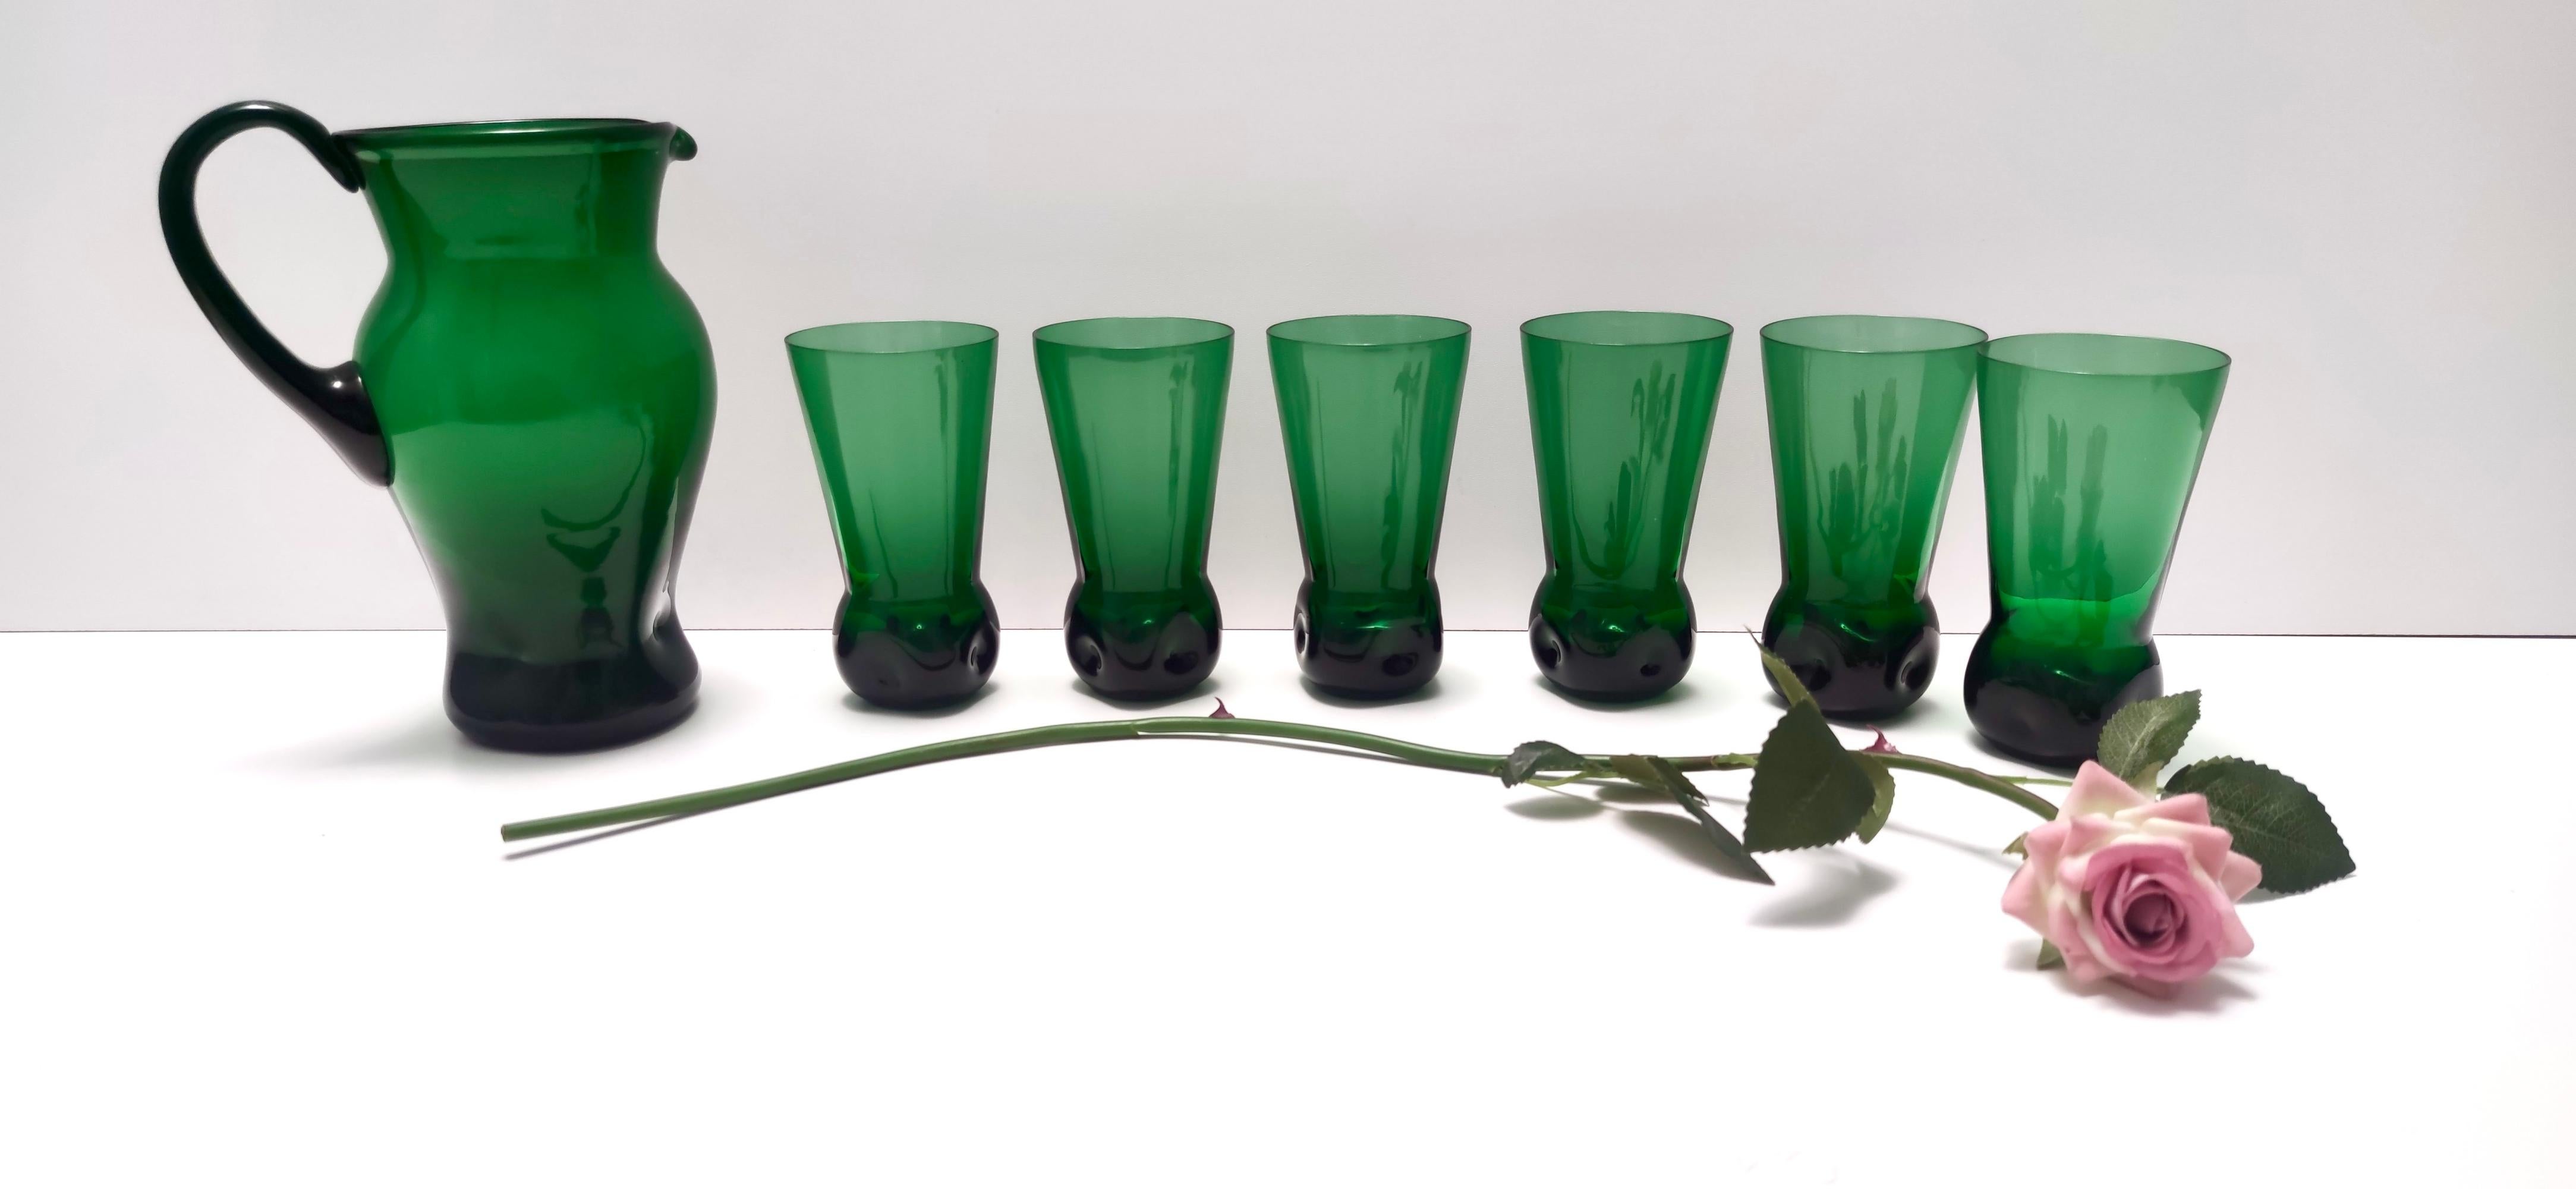 Made in Italy, 1950s.
Made in hand-blown glass, in Empoli: as a matter of fact the same drinking glass with a slightly different shape, is in the Glass Museum in Empoli.
It is a vintage set, therefore it might show slight traces of use, but it can